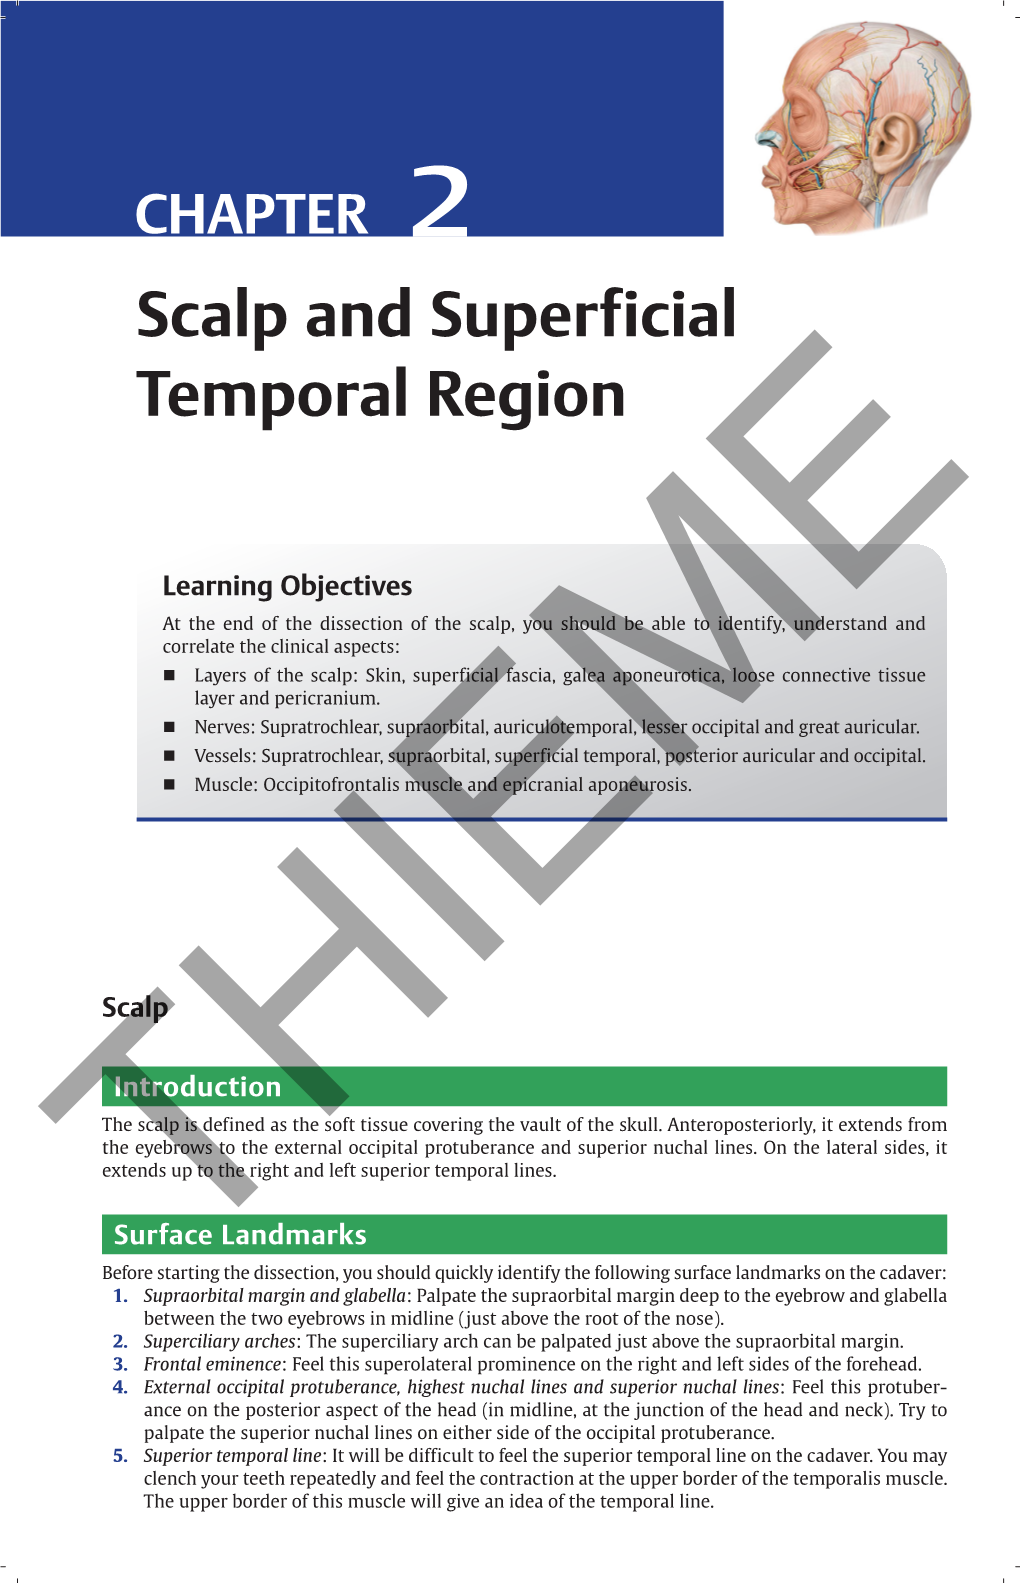 Scalp and Superficial Temporal Region